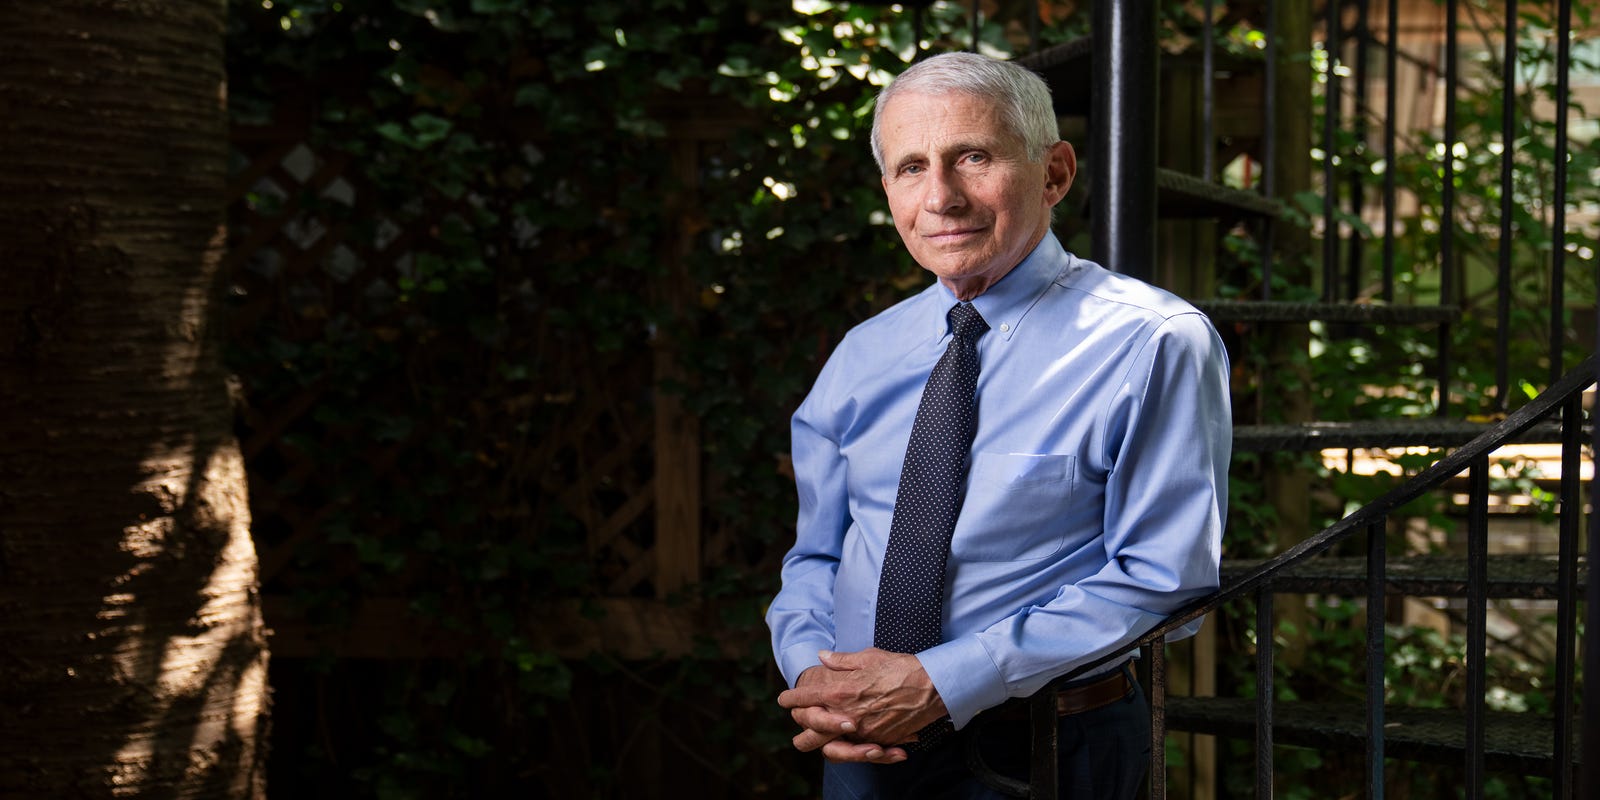 Dr. Anthony Fauci on how COVID-19, Trump turned him into a hero and villain